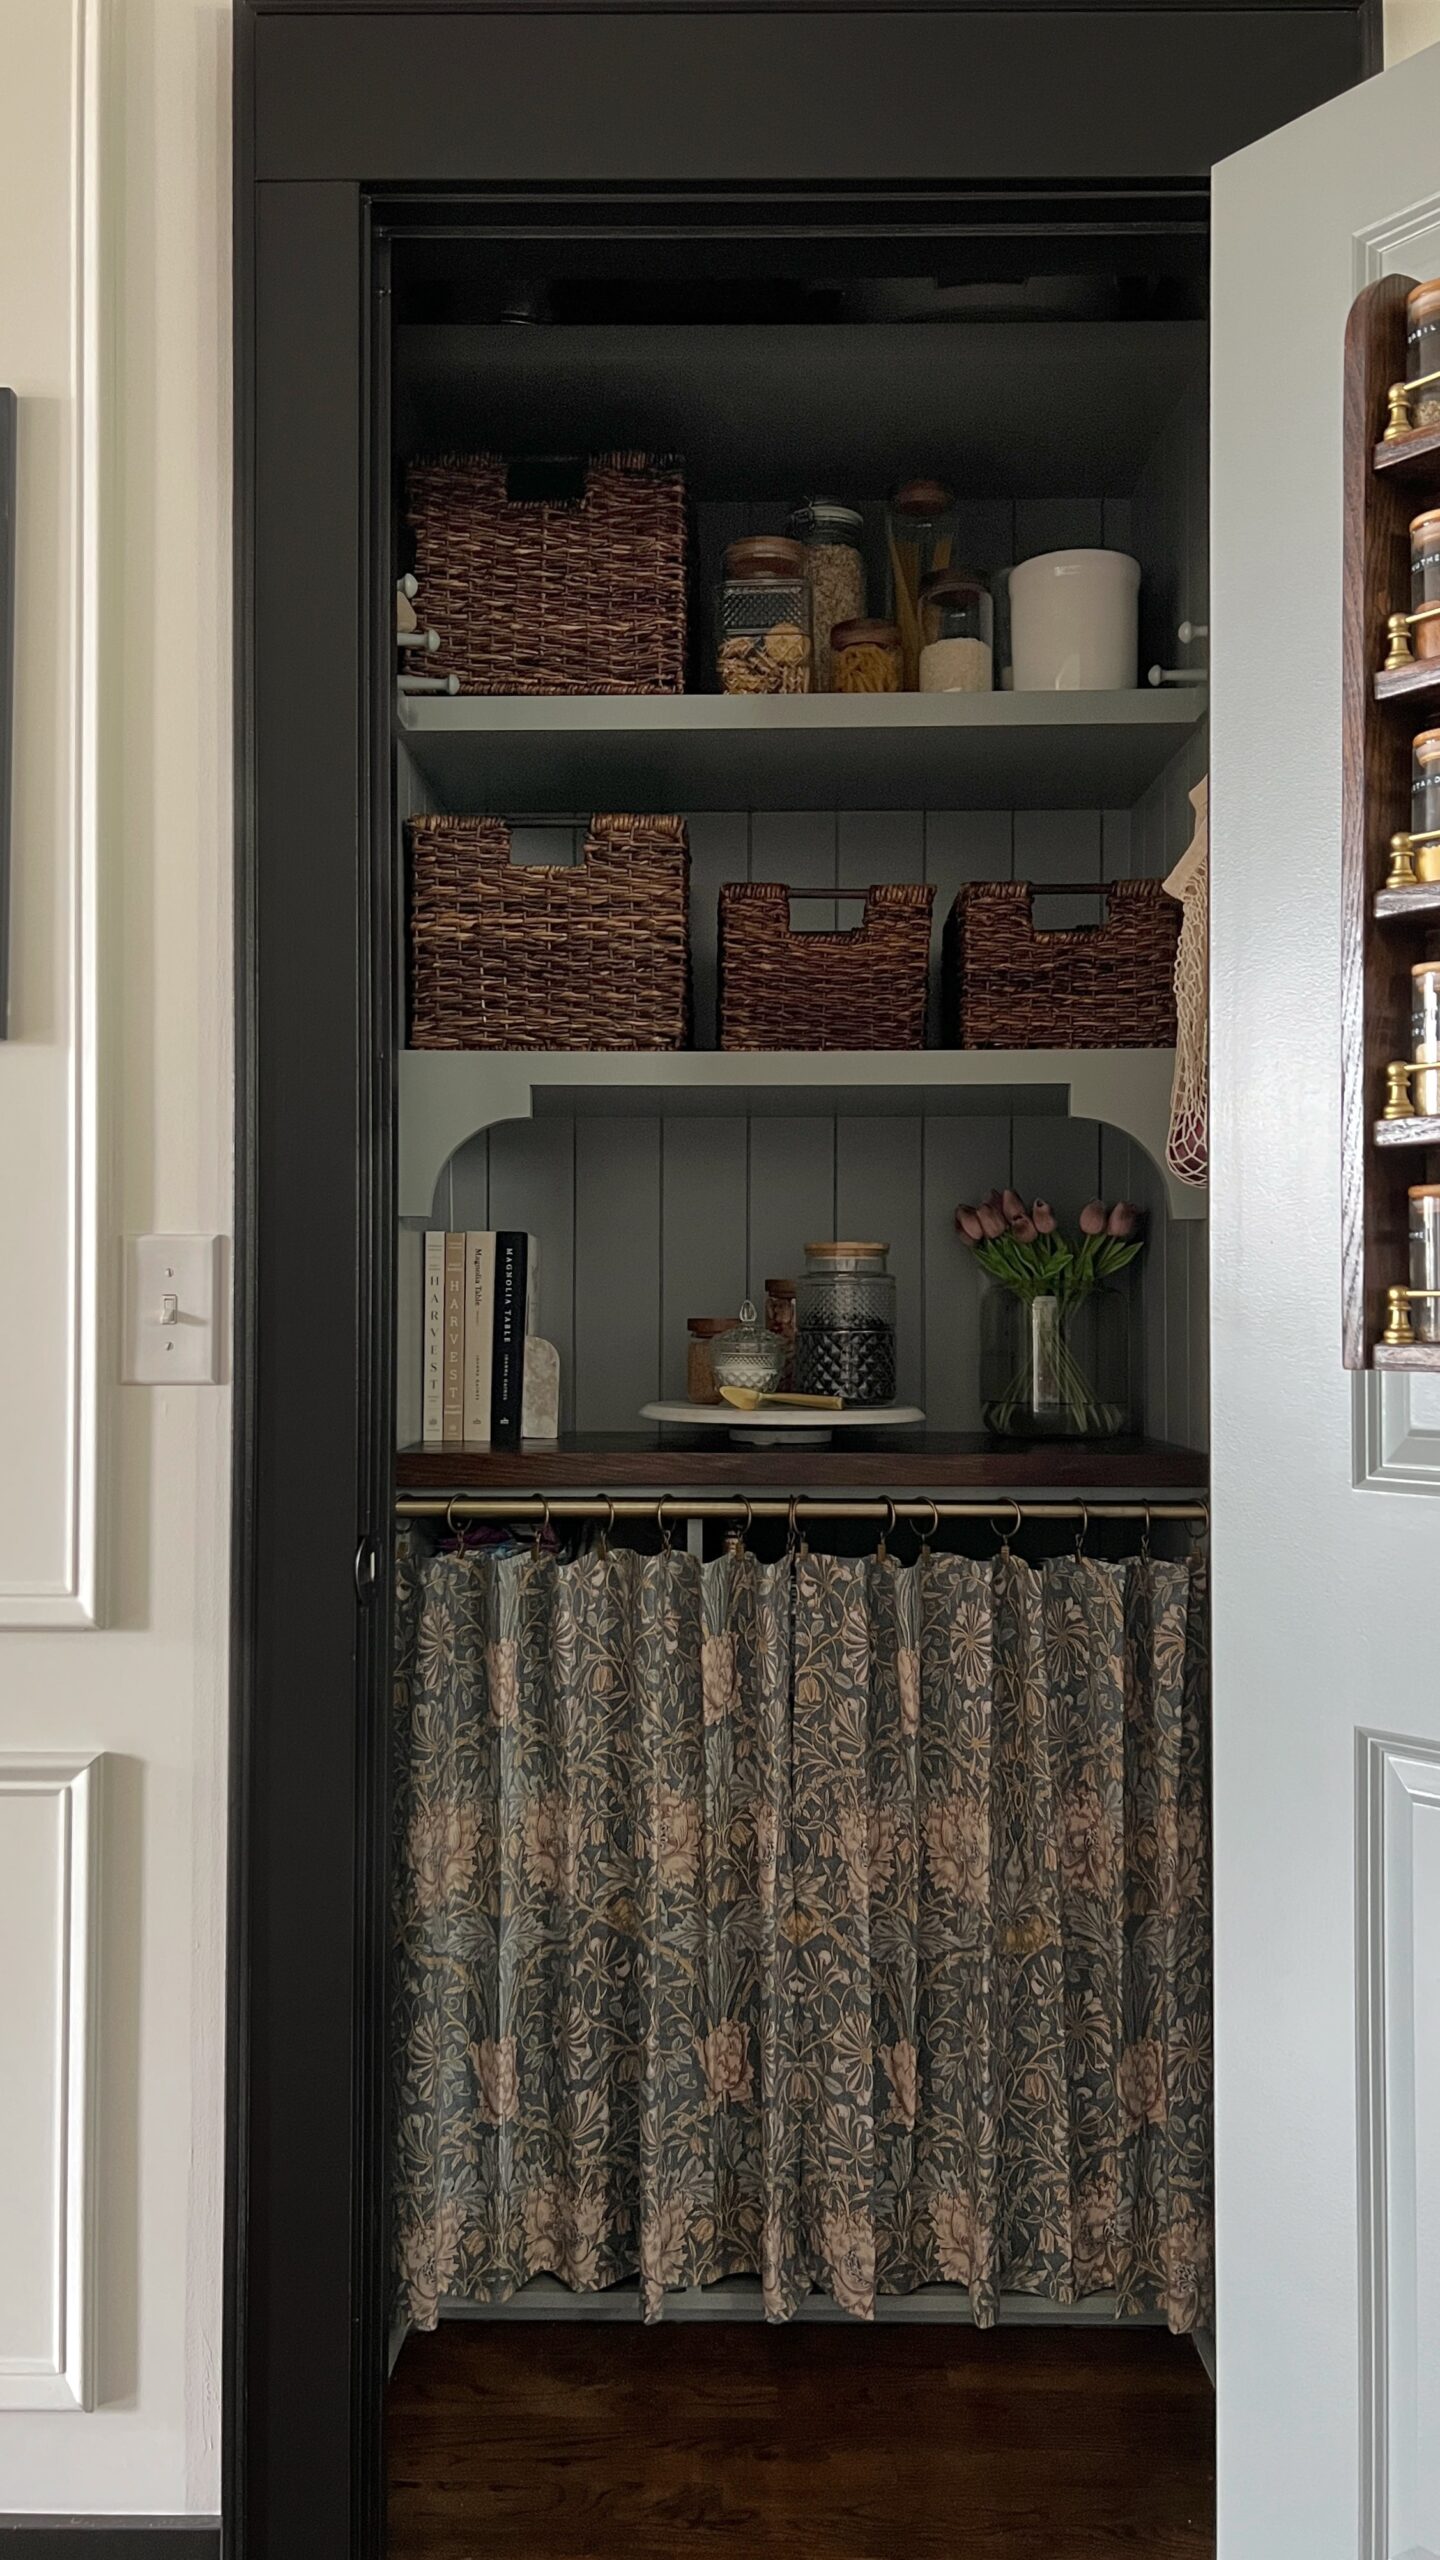 a DIY pantry makeover with shiplap, corbels, peg rack, and curtains